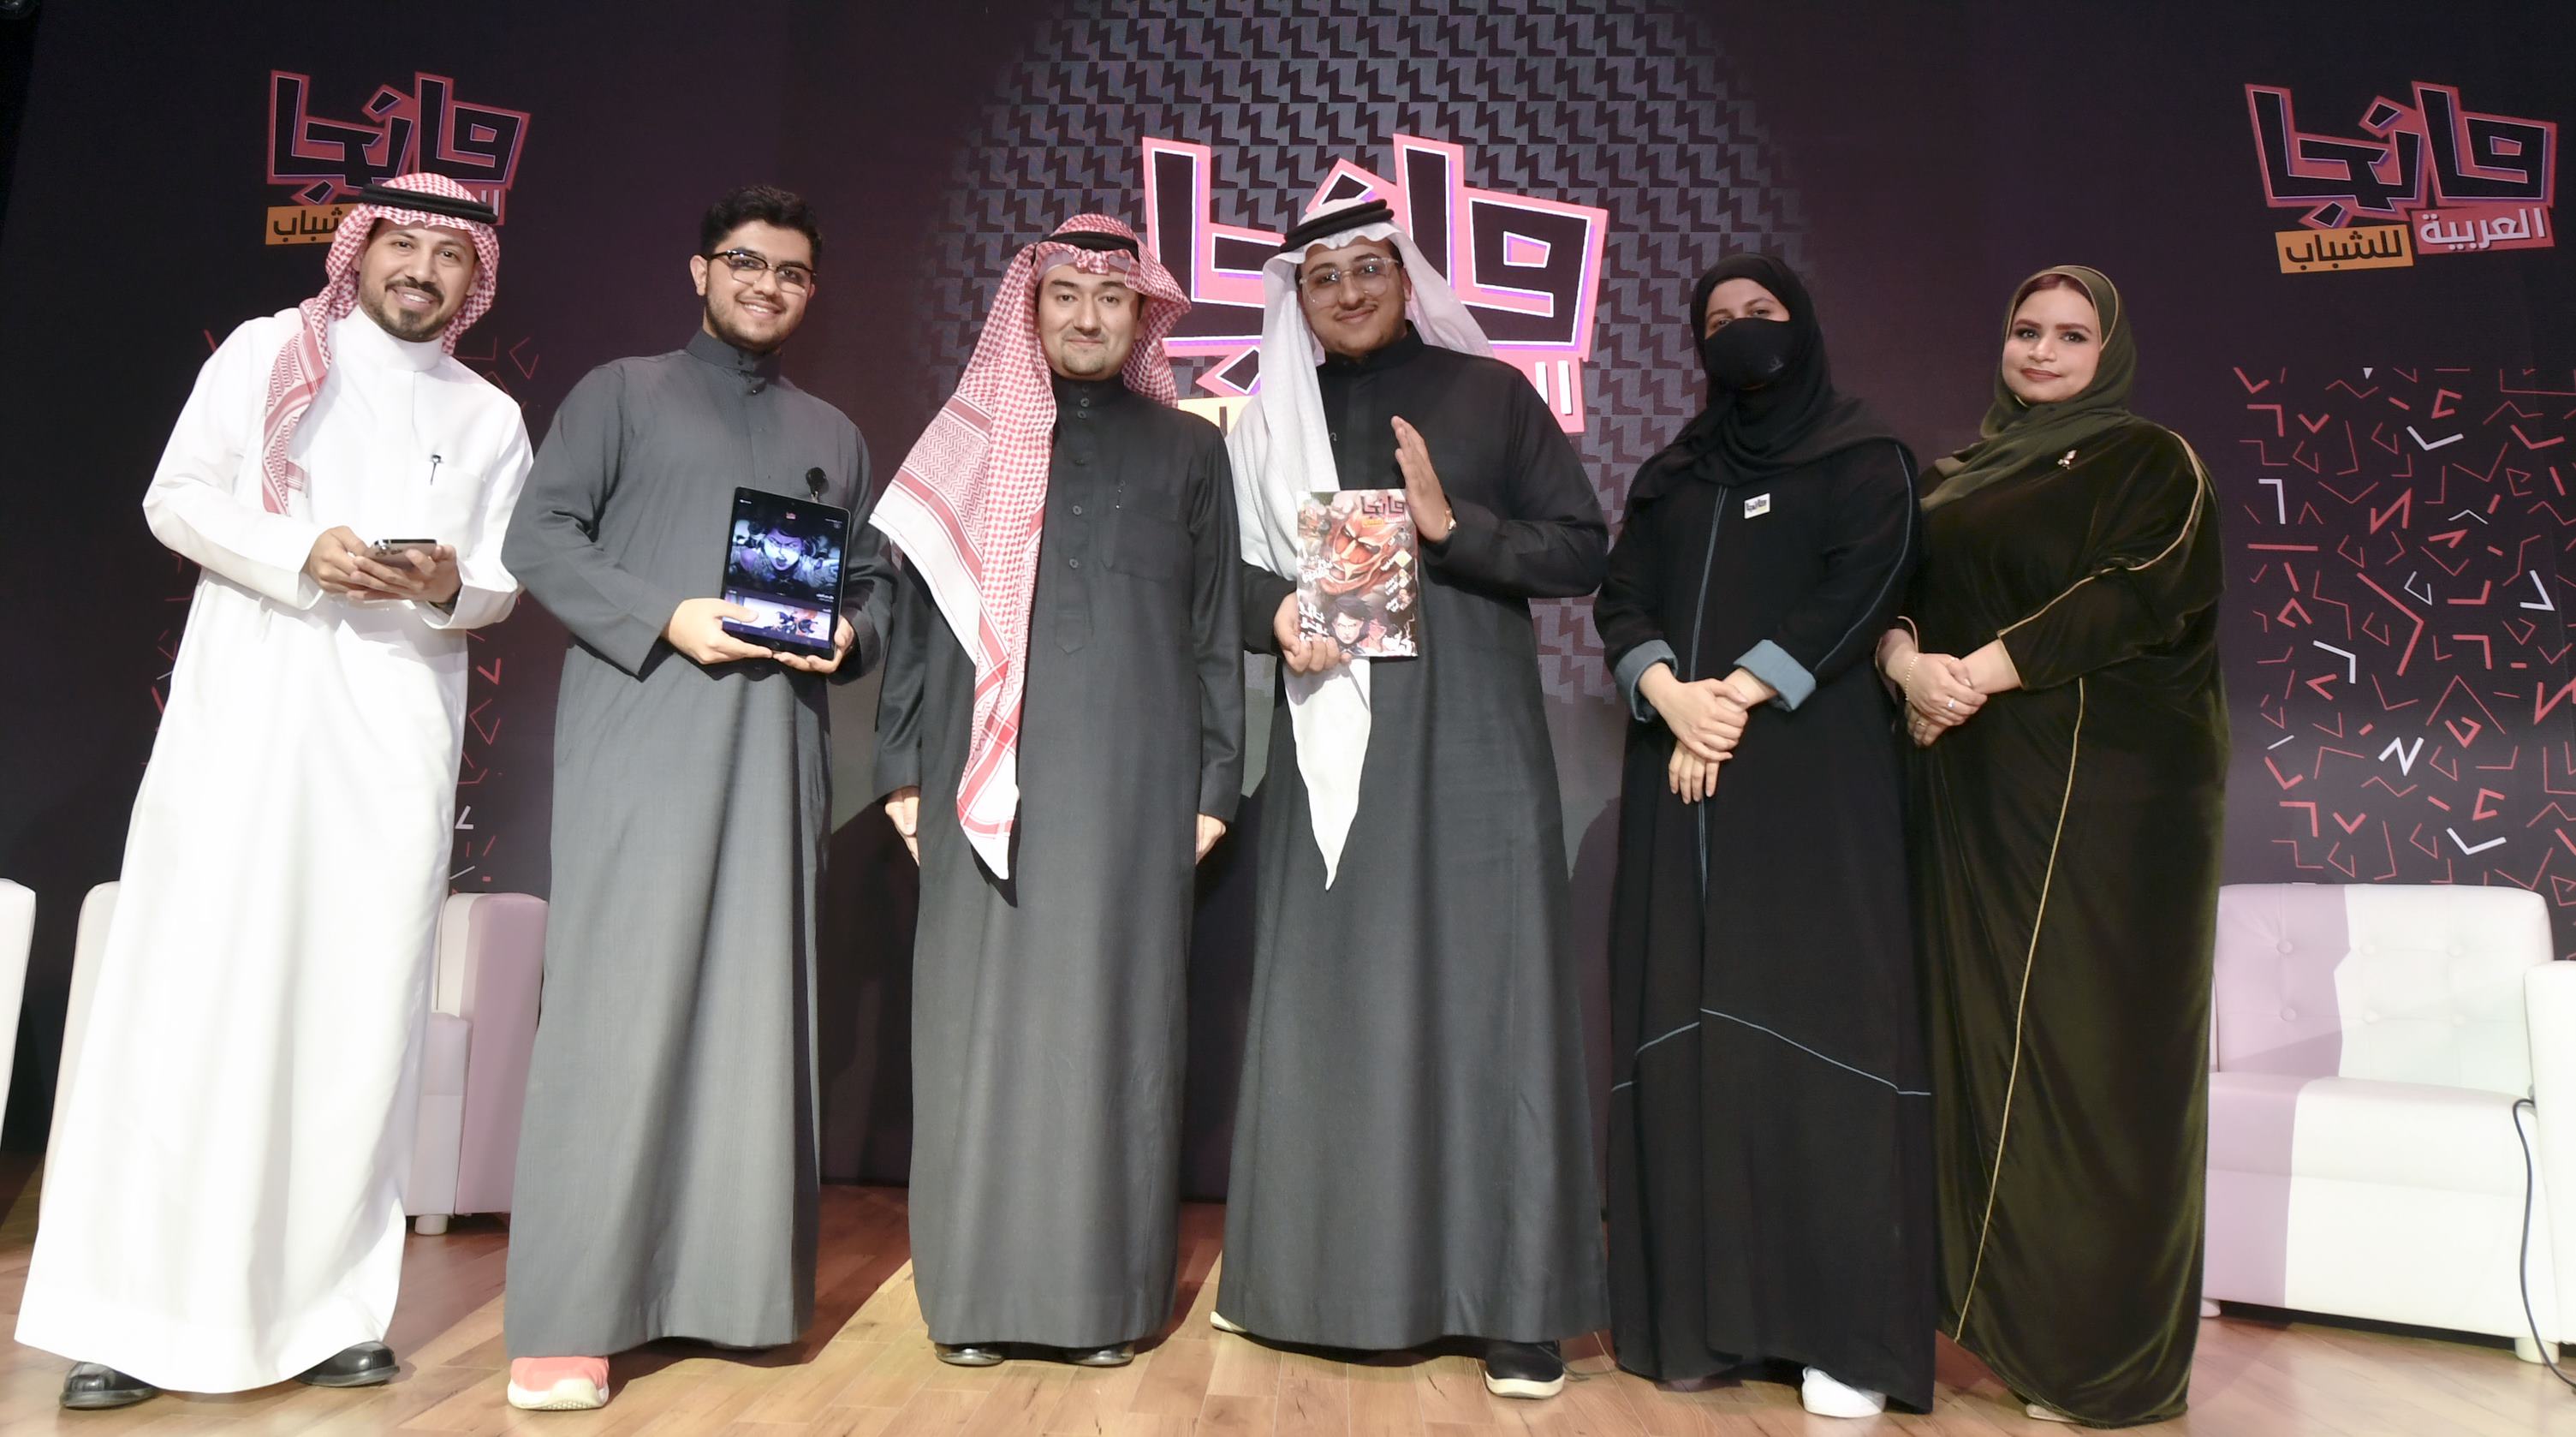 SRMG launches the inaugural issue of “Manga Arabia Youth” Magazine, inspired by Arab culture and values  